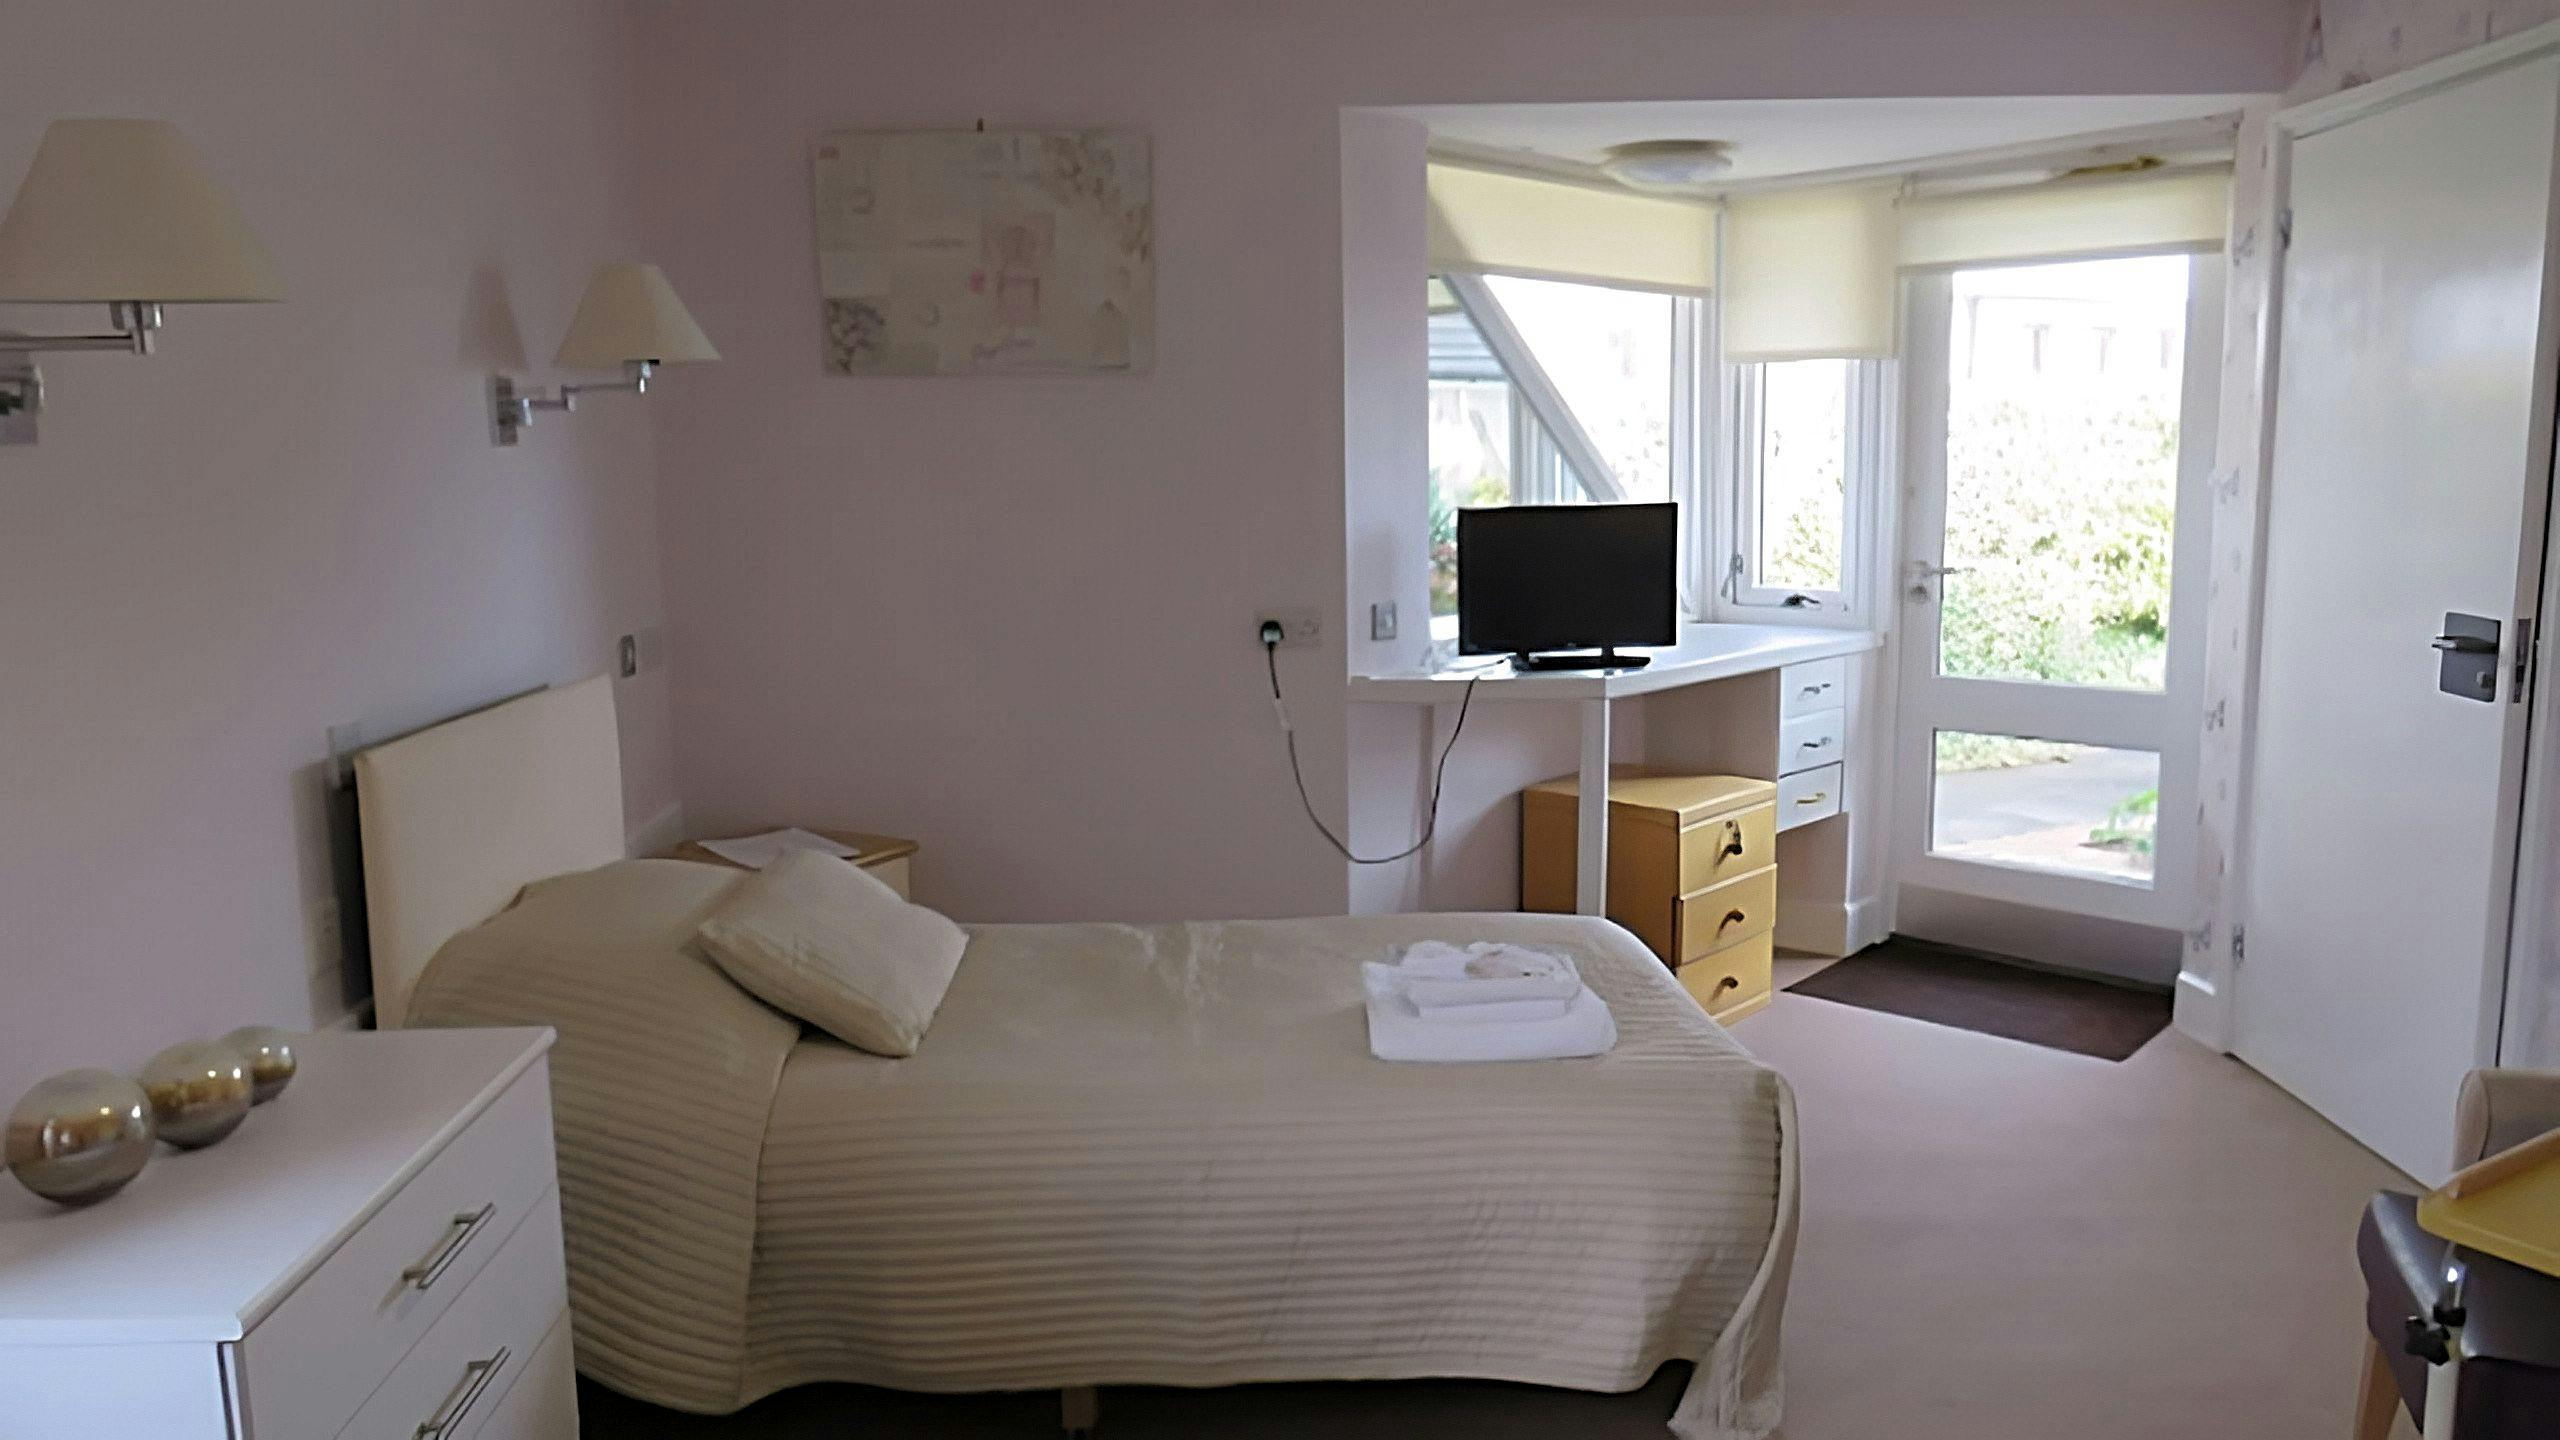 Countrywide - White Rose Lodge care home 2